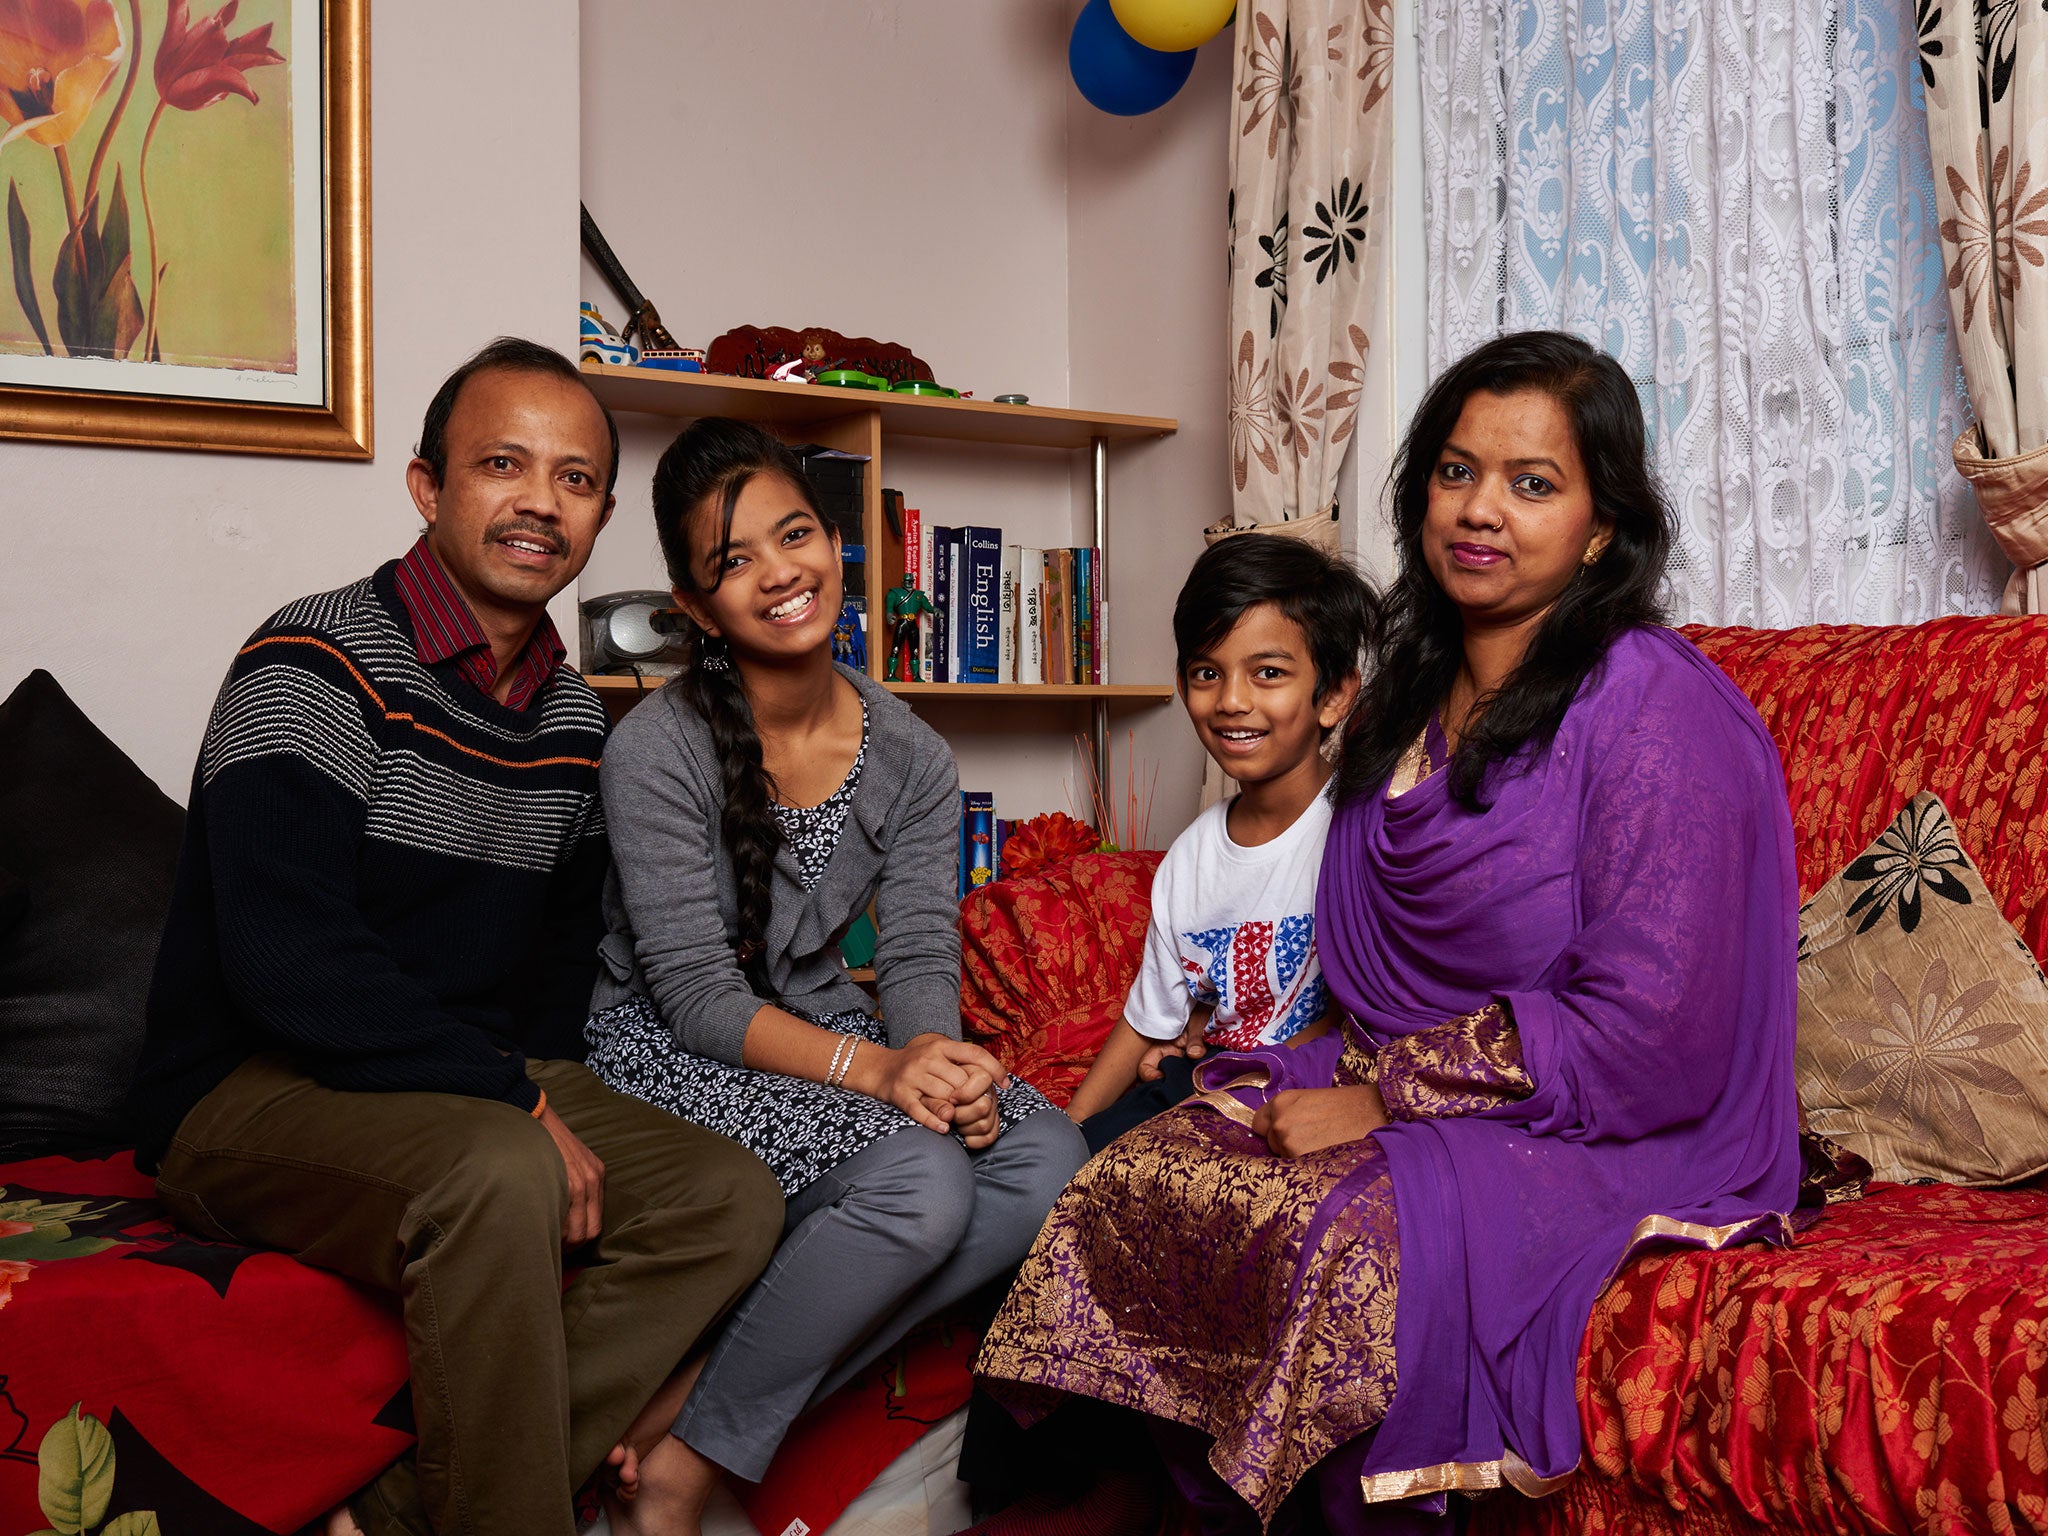 The Ahad family from Bow, east London, came to the UK from Italy two years ago